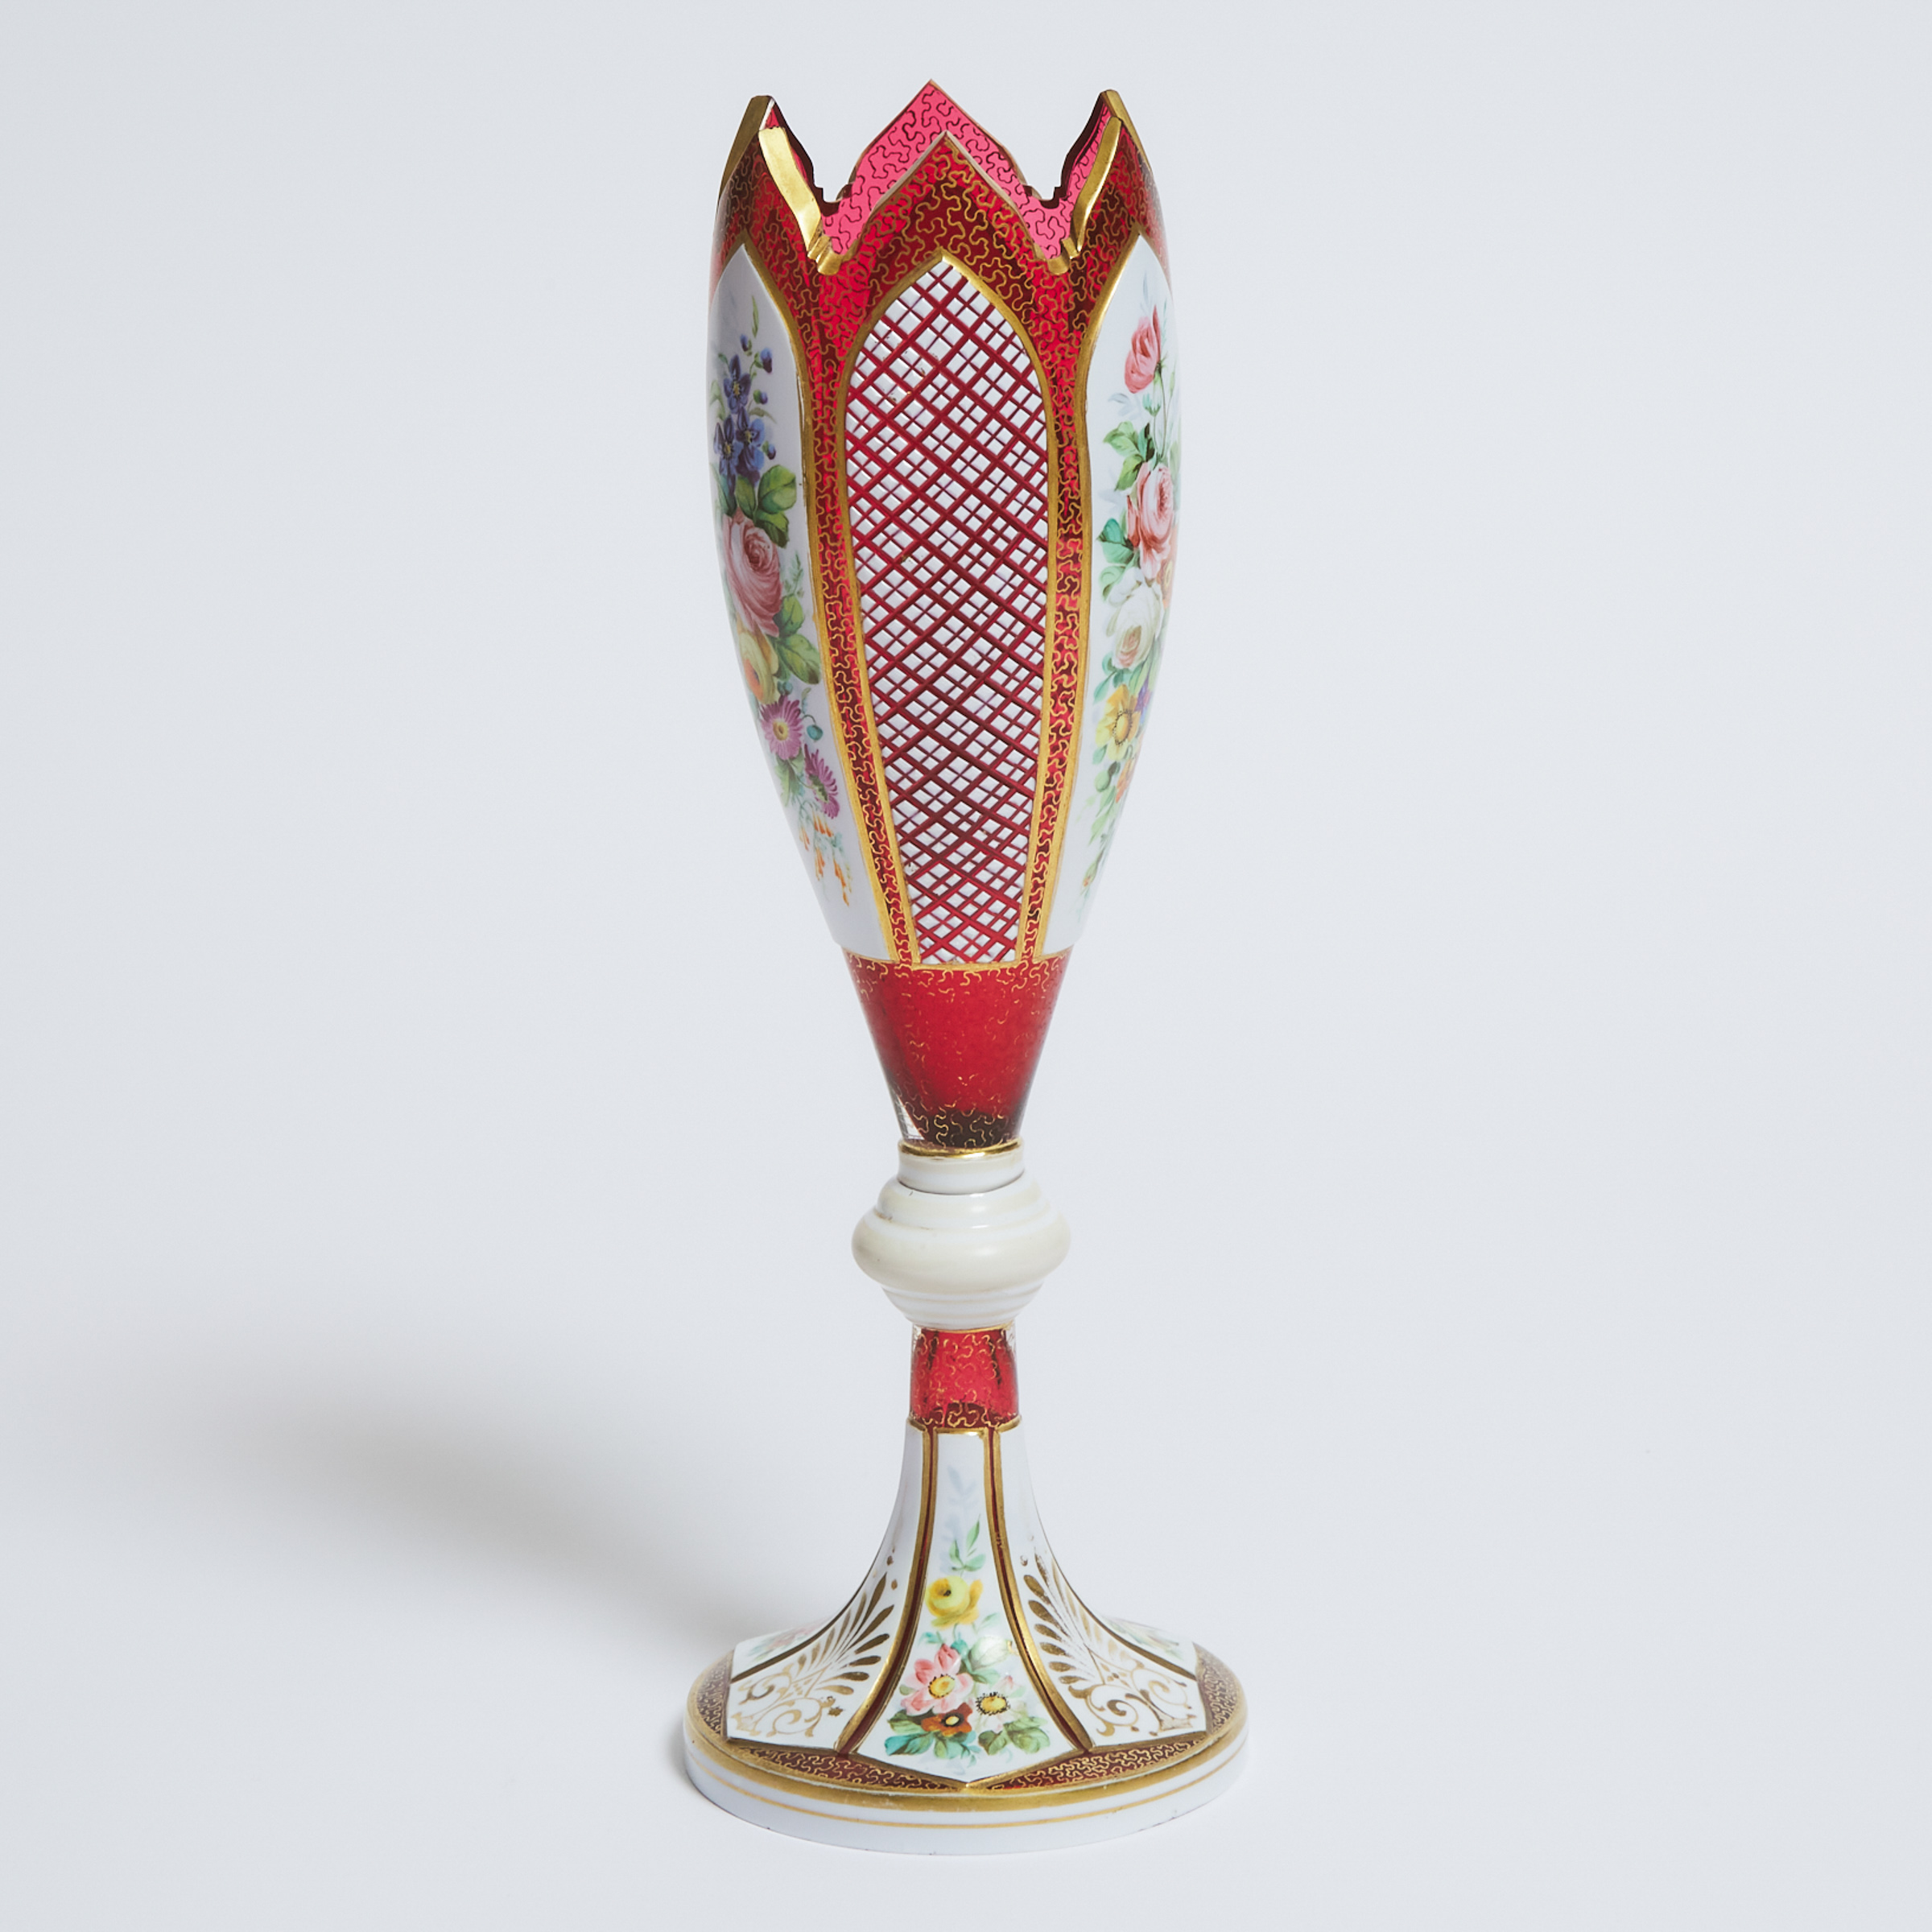 Bohemian Overlaid, Enameled and Gilt Red Glass Vase, late 19th century